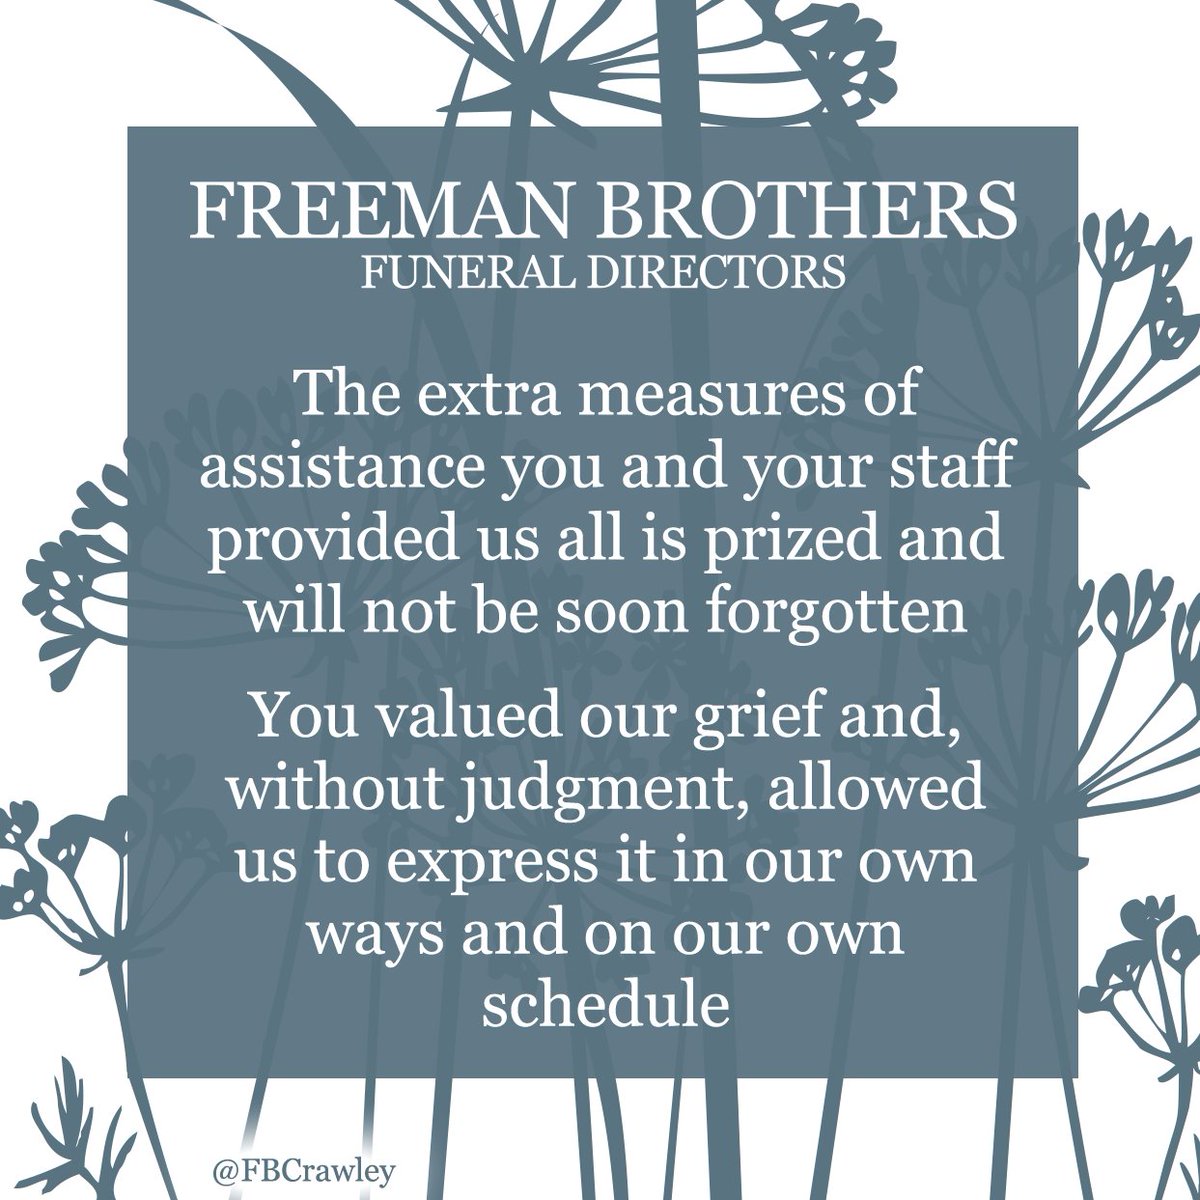 Still one of our favourite messages from a family we served in 2021. We hope every family we serve feels valued and free to grieve in their own way. #FeedbackMatters #FridayFeedback #GriefMatters #ValueAdded